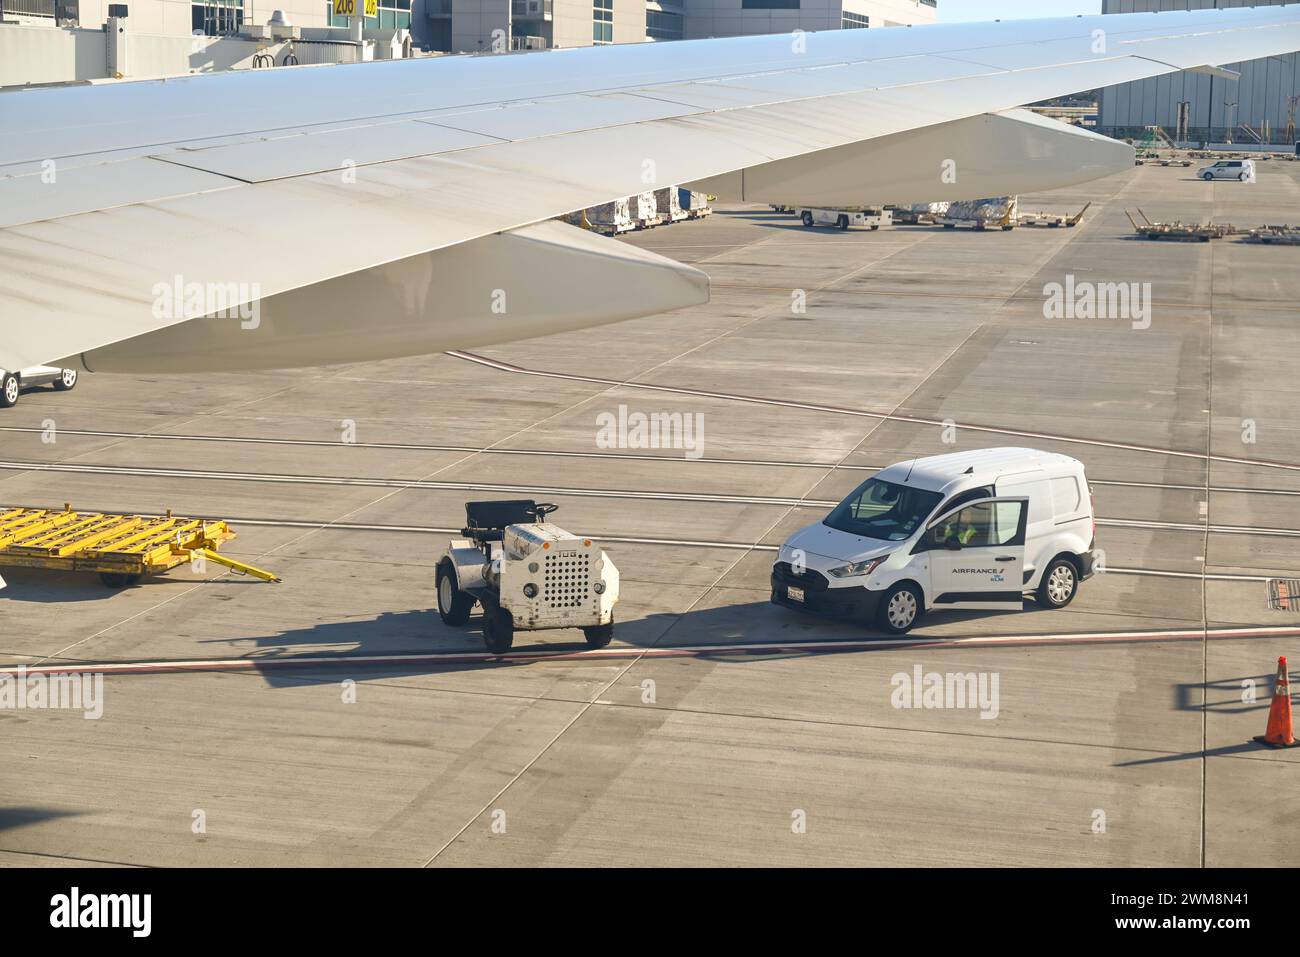 Air France/KLM  Ground crew servicing airplane at LAX, in Los Angeles, CA Stock Photo